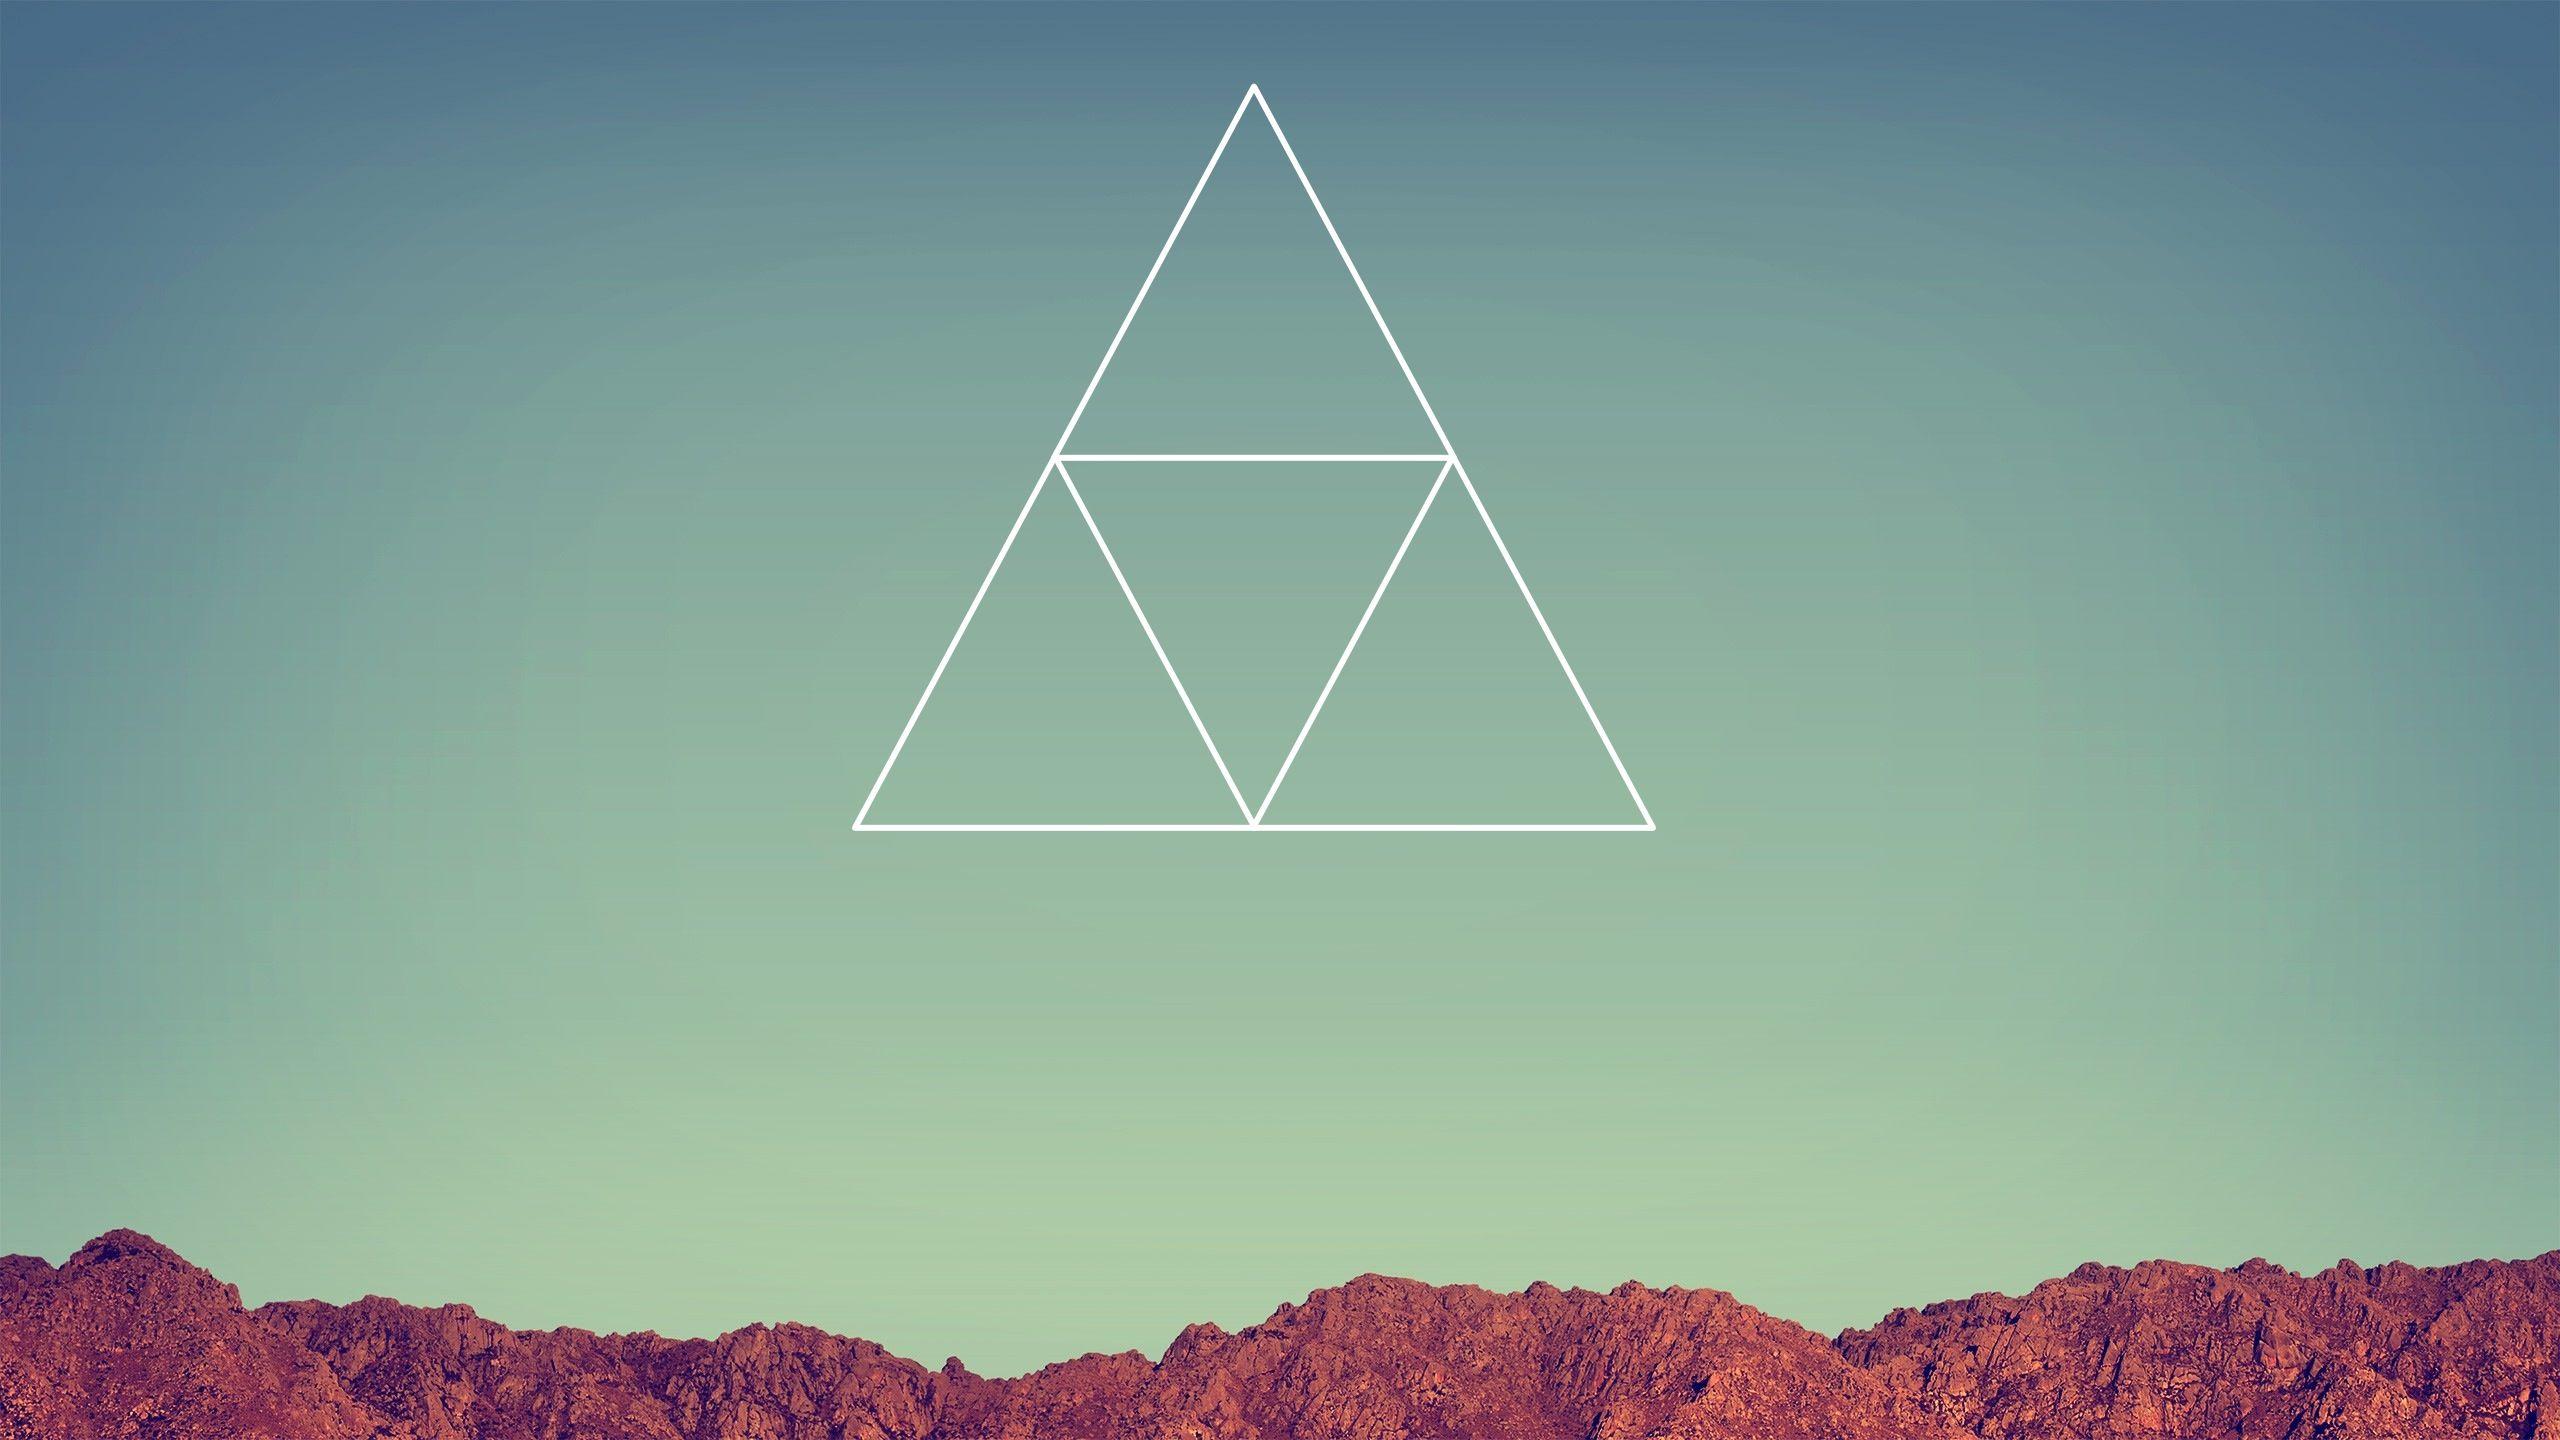 Hipster Triangle Logo - Hipster Triangle Wallpaper Background